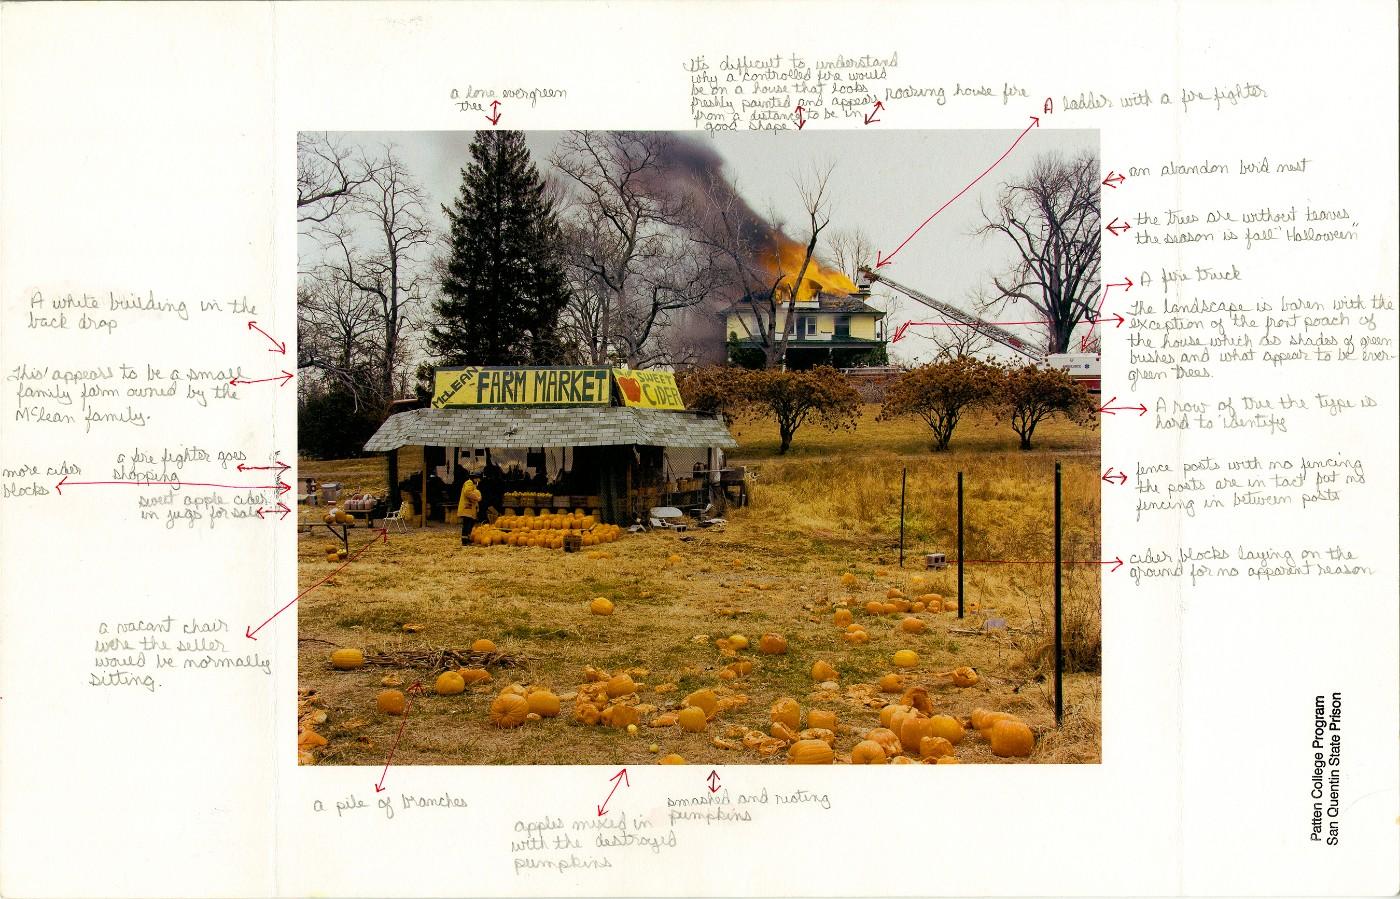 Nigel Poor and Frankie Smith. Mapping Joel Sternfeld, side A, 2011/12.